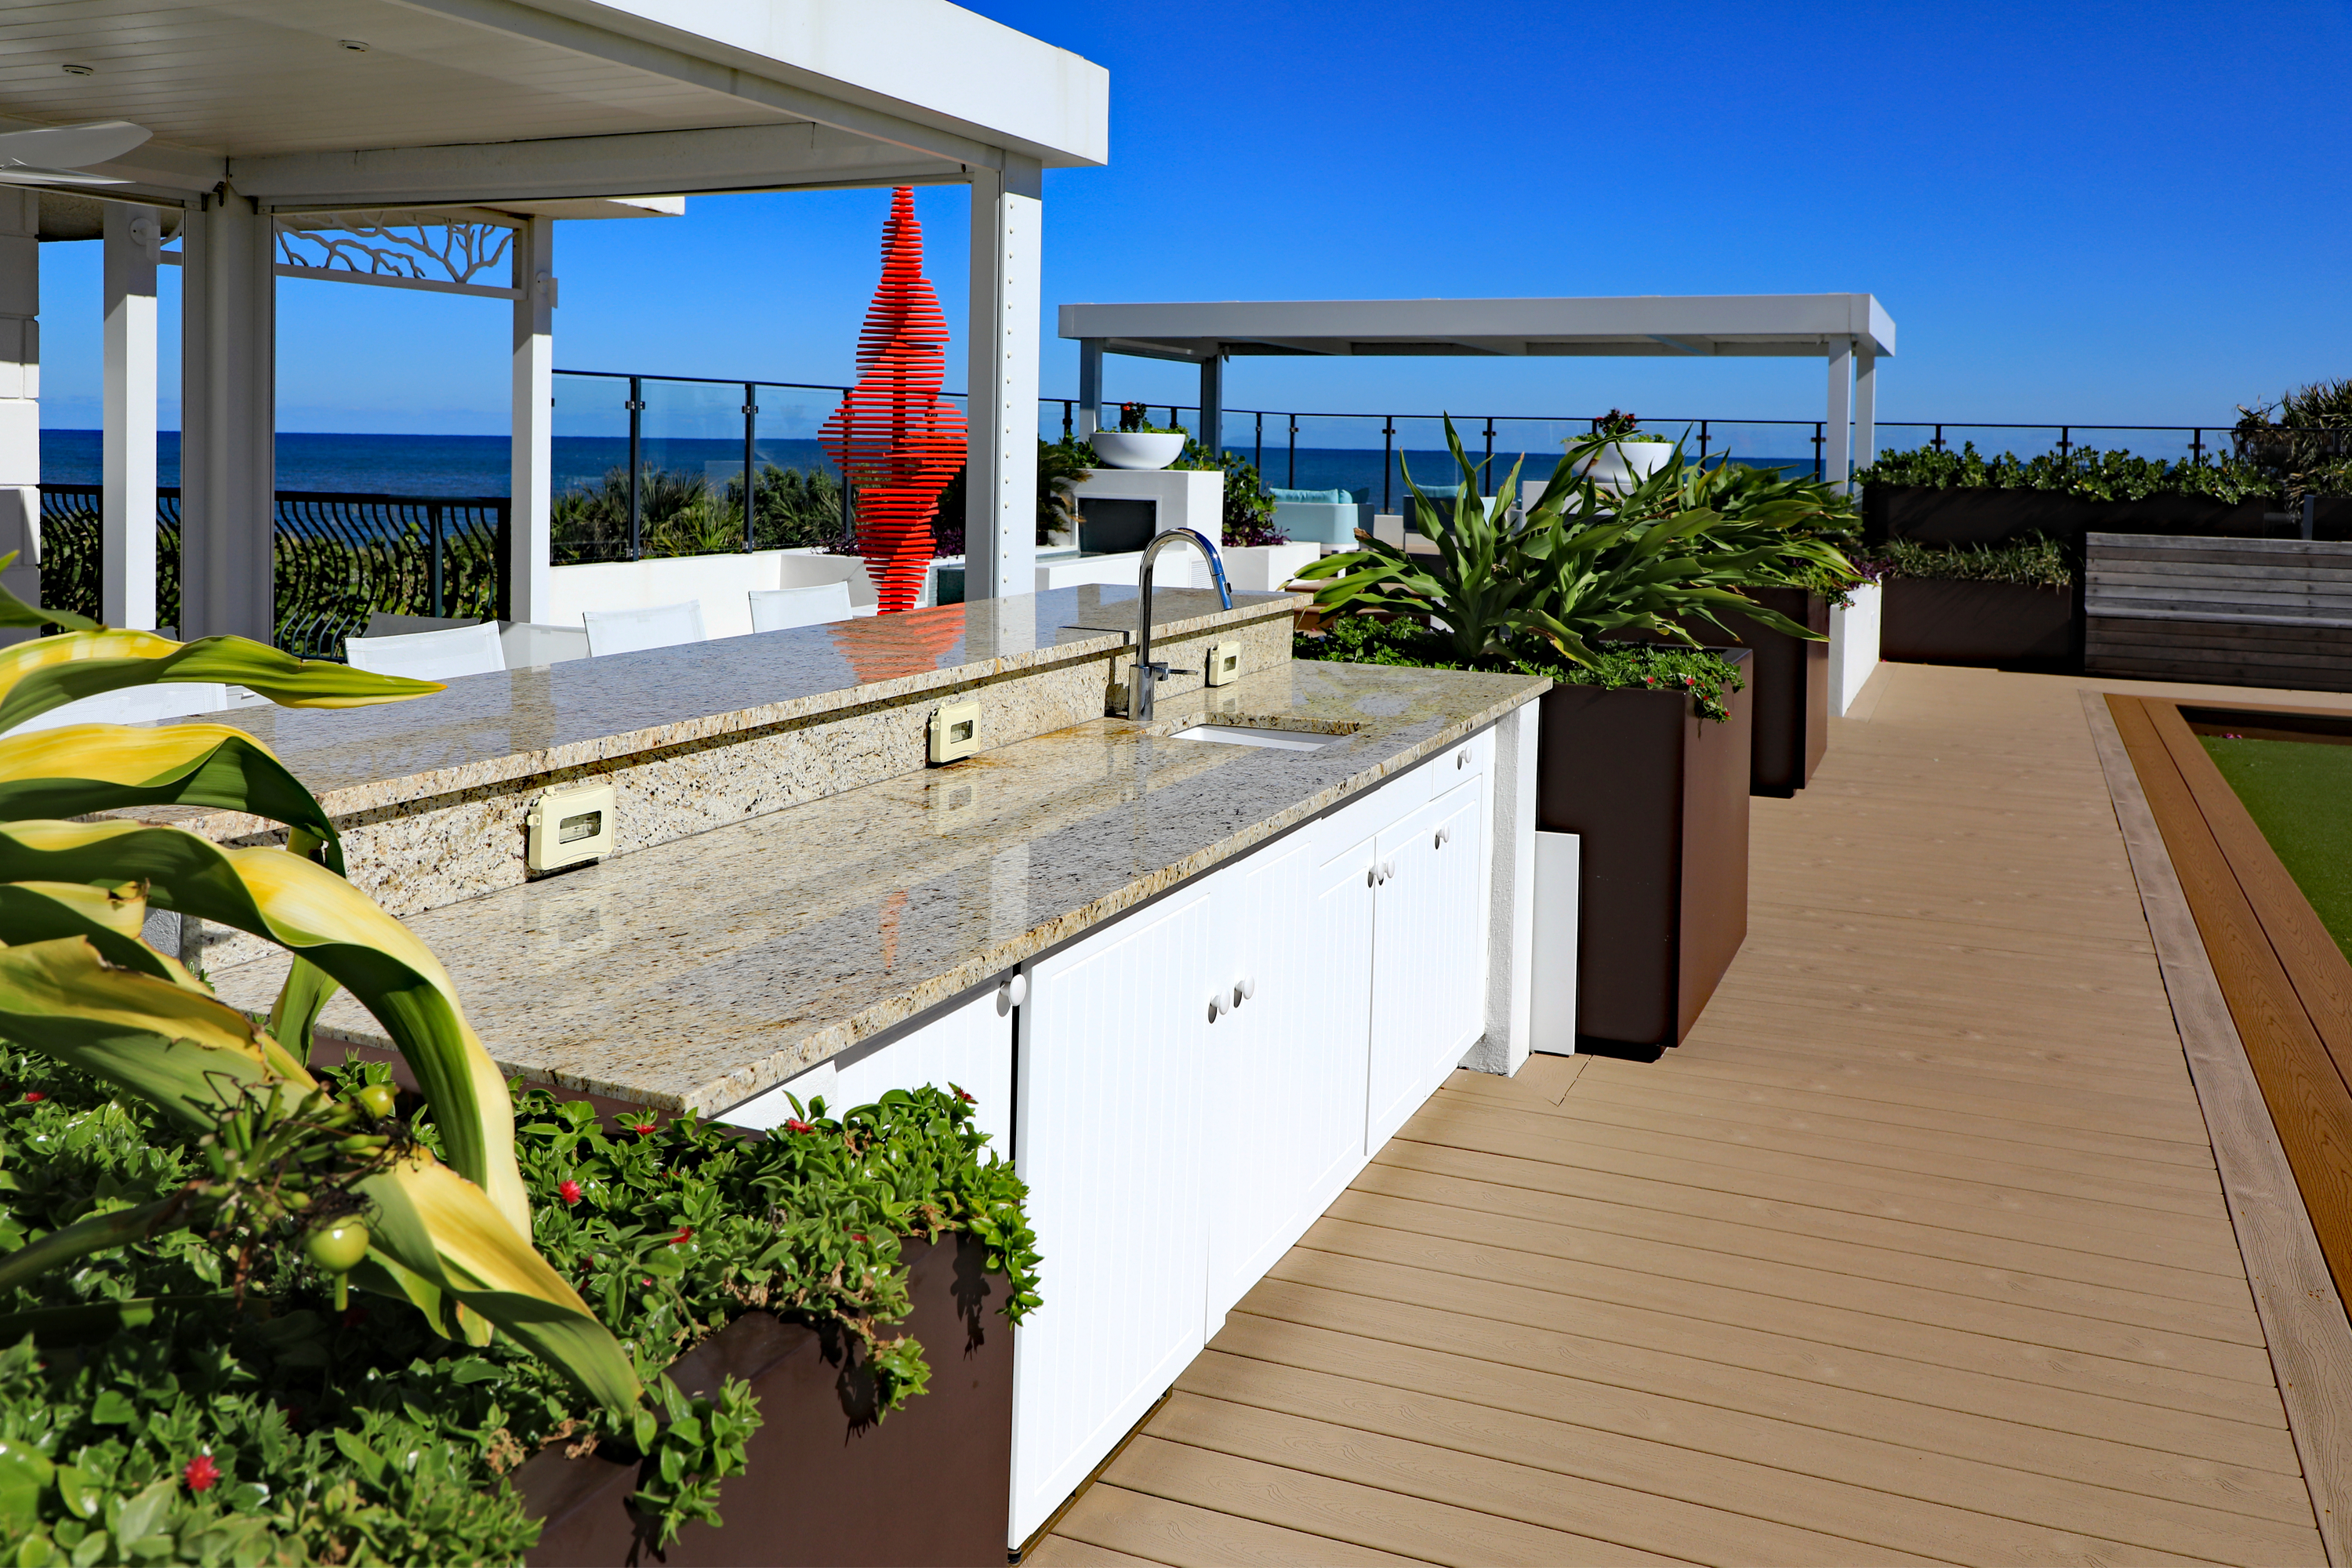 Outdoor kitchen by the sea